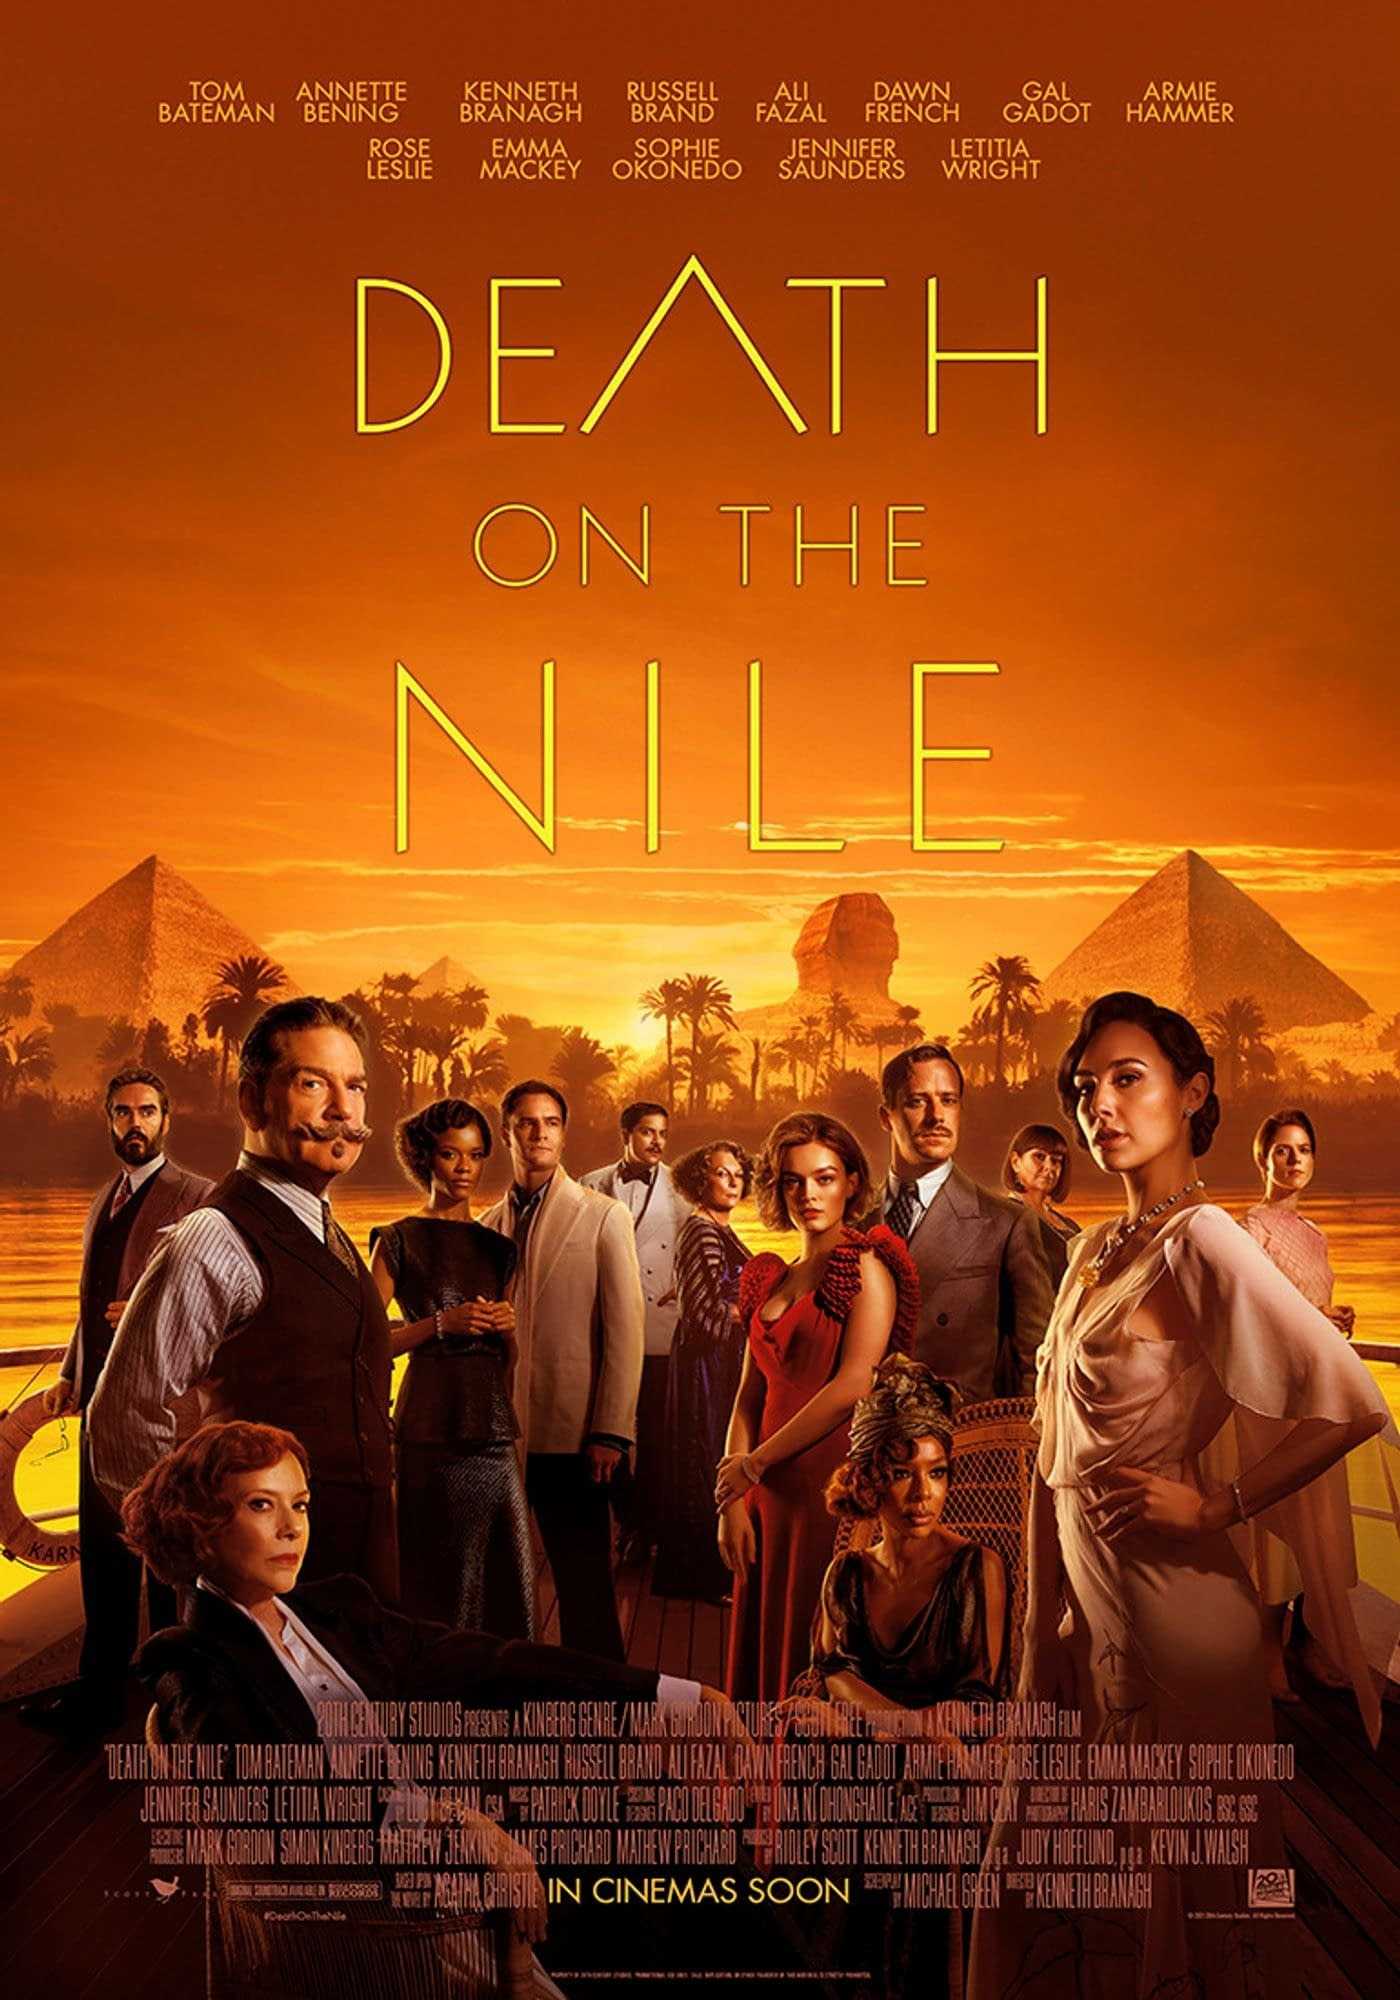 Death-on-the-Nile-Table-of-Contents-Image.tring.jpg